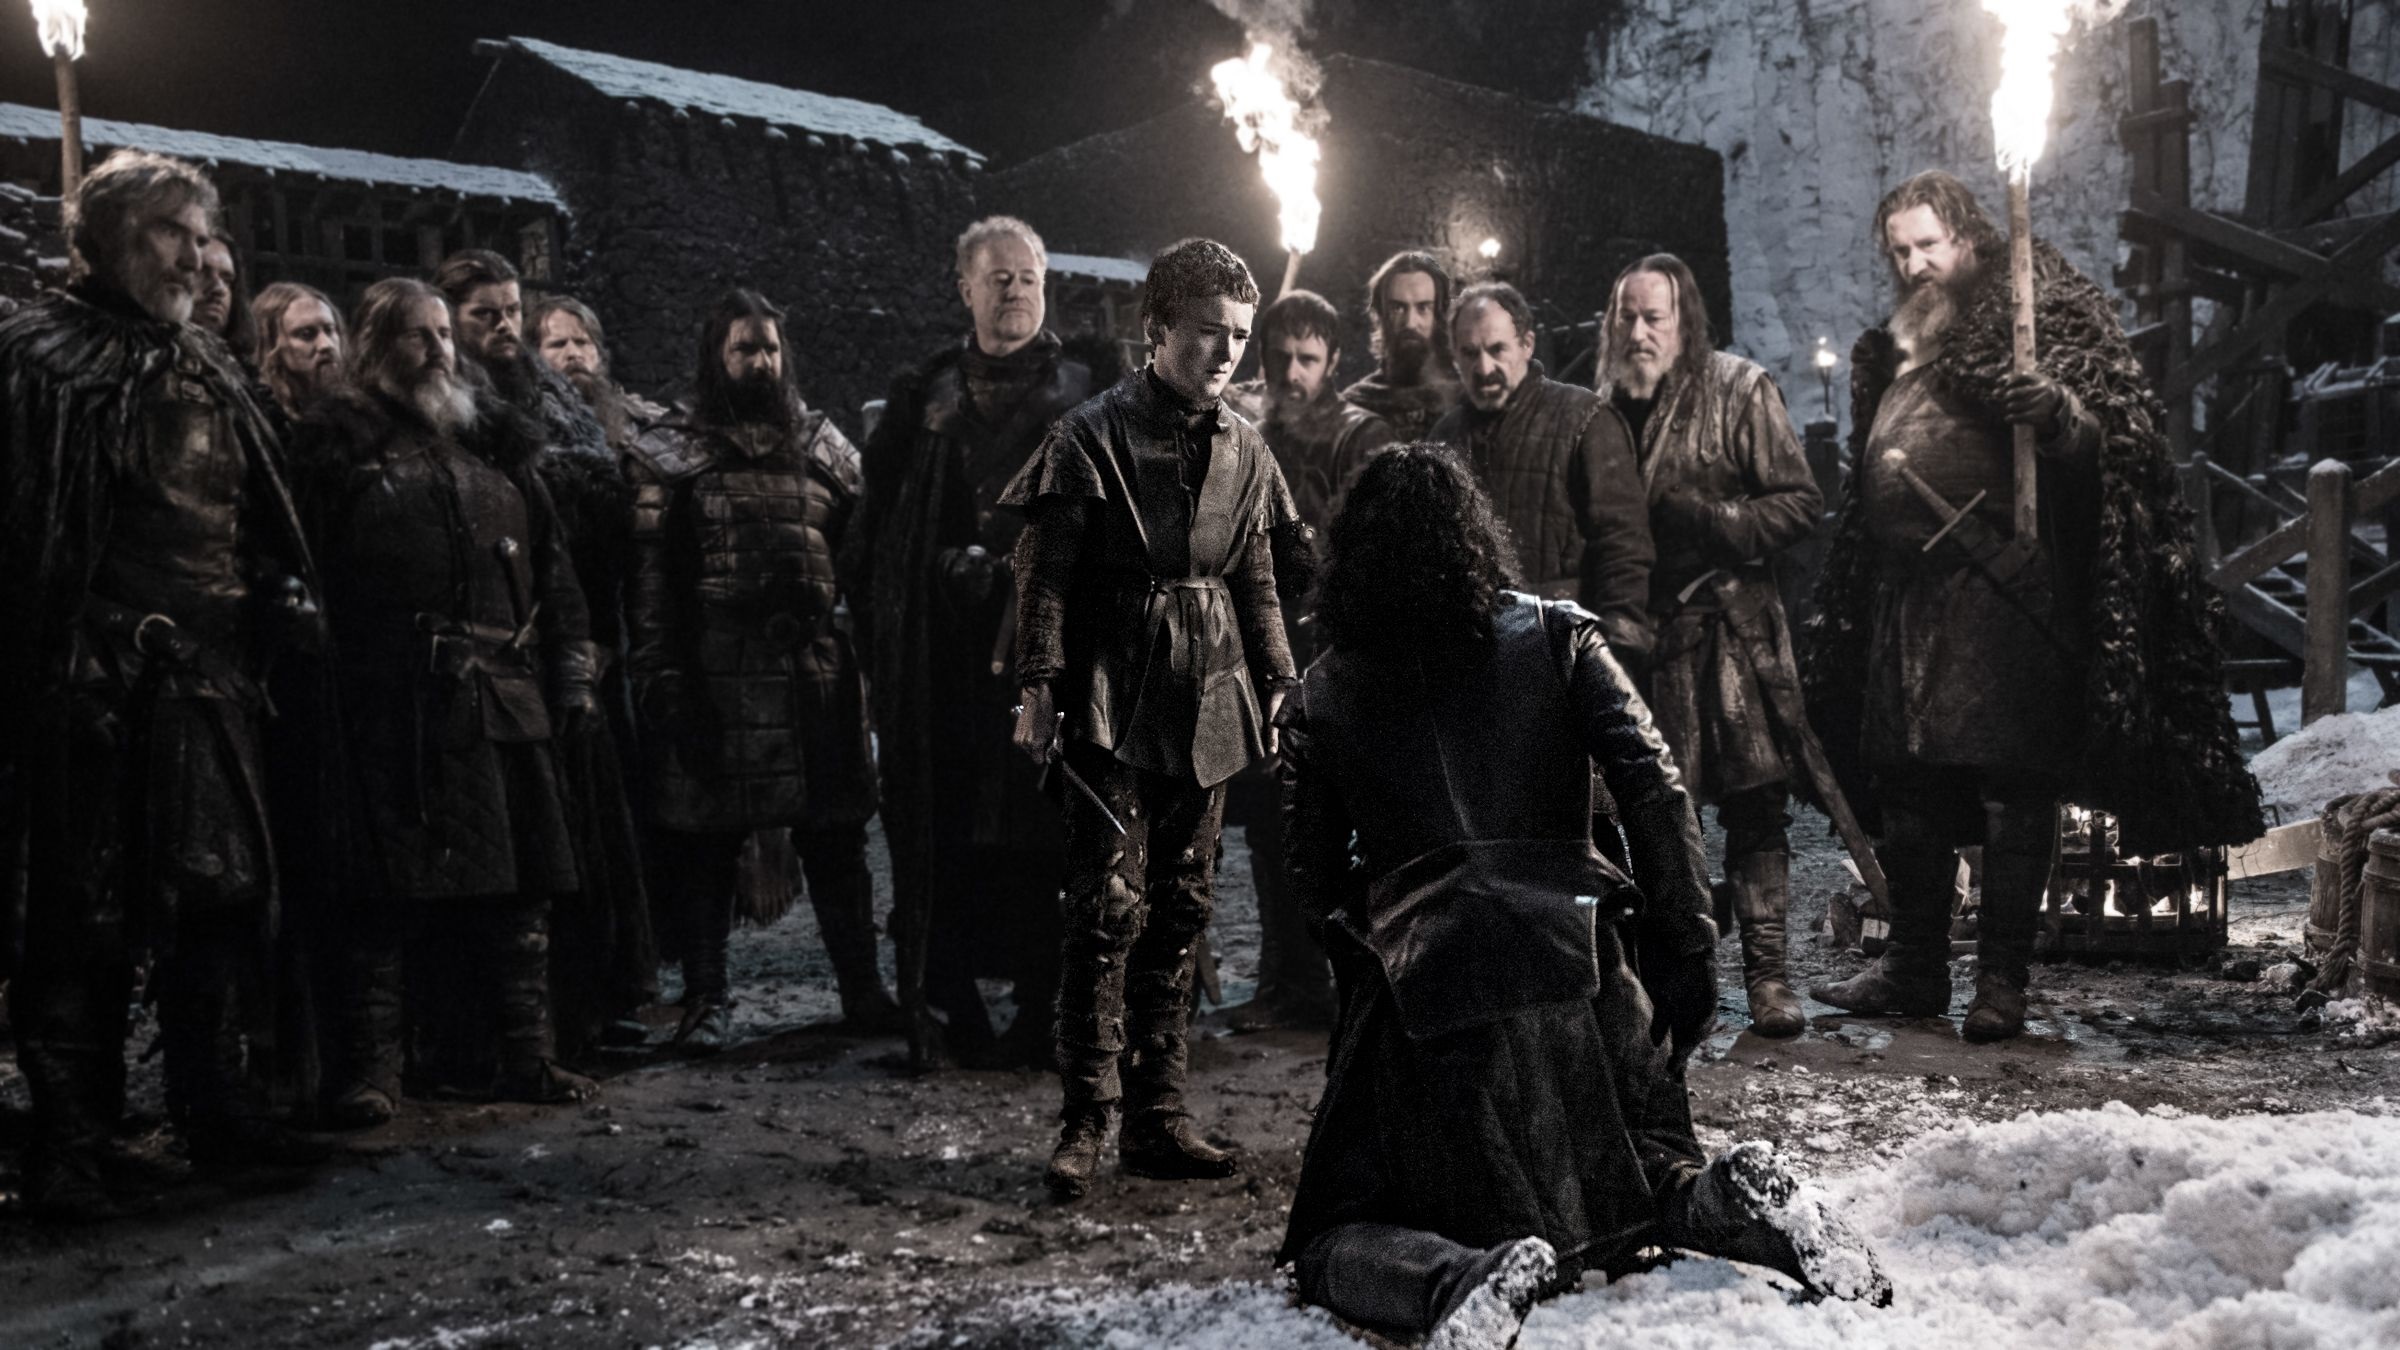 jon-snow-dies-at-castle-black-for-the-watch